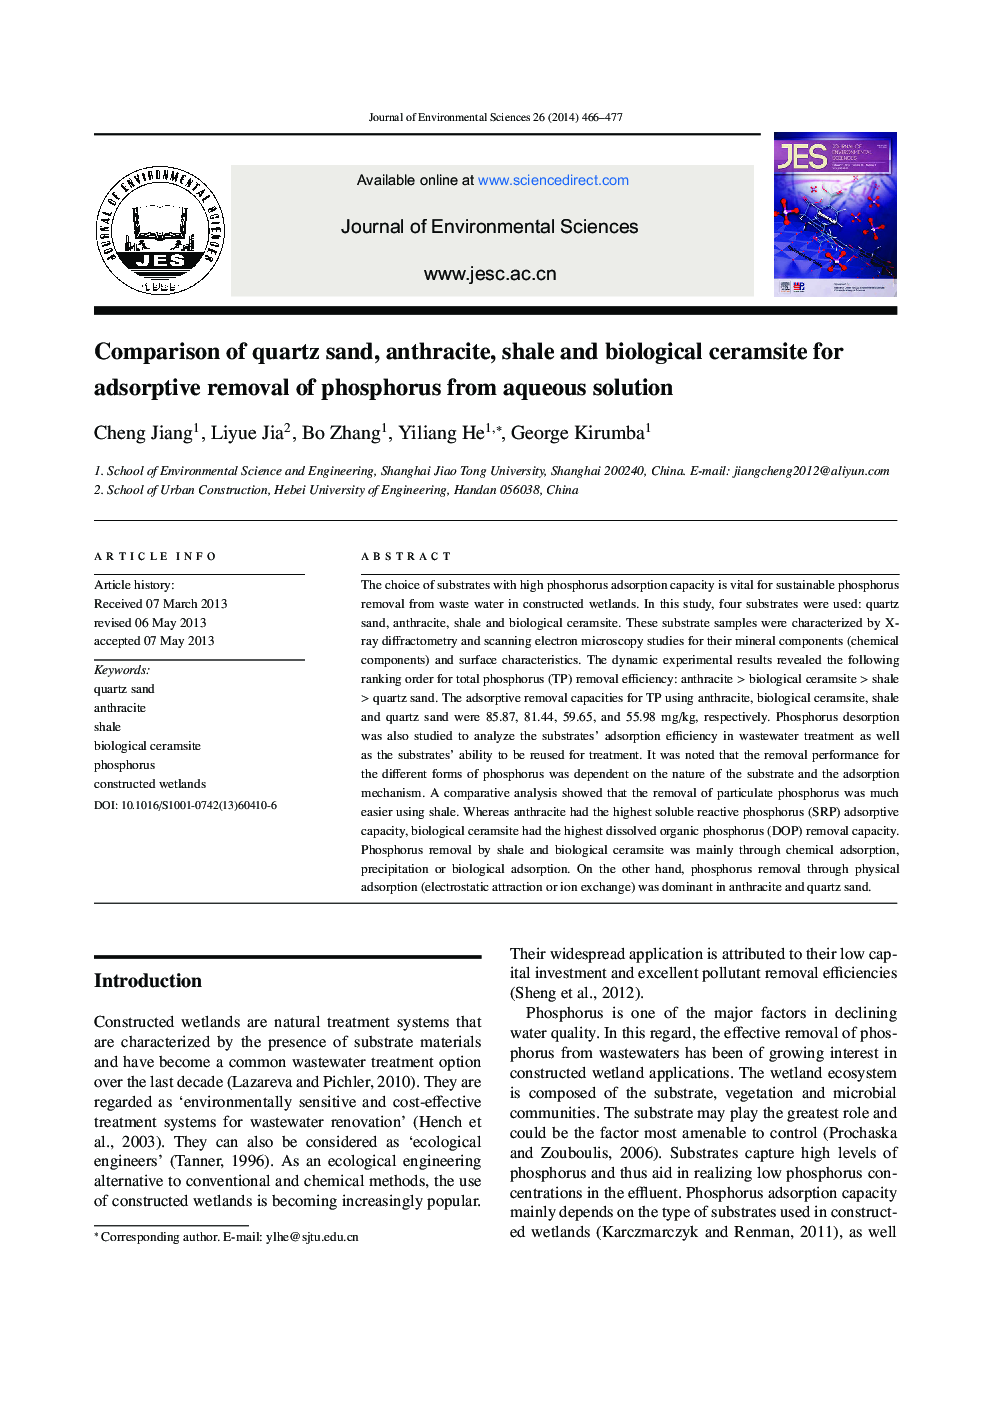 Comparison of quartz sand, anthracite, shale and biological ceramsite for adsorptive removal of phosphorus from aqueous solution